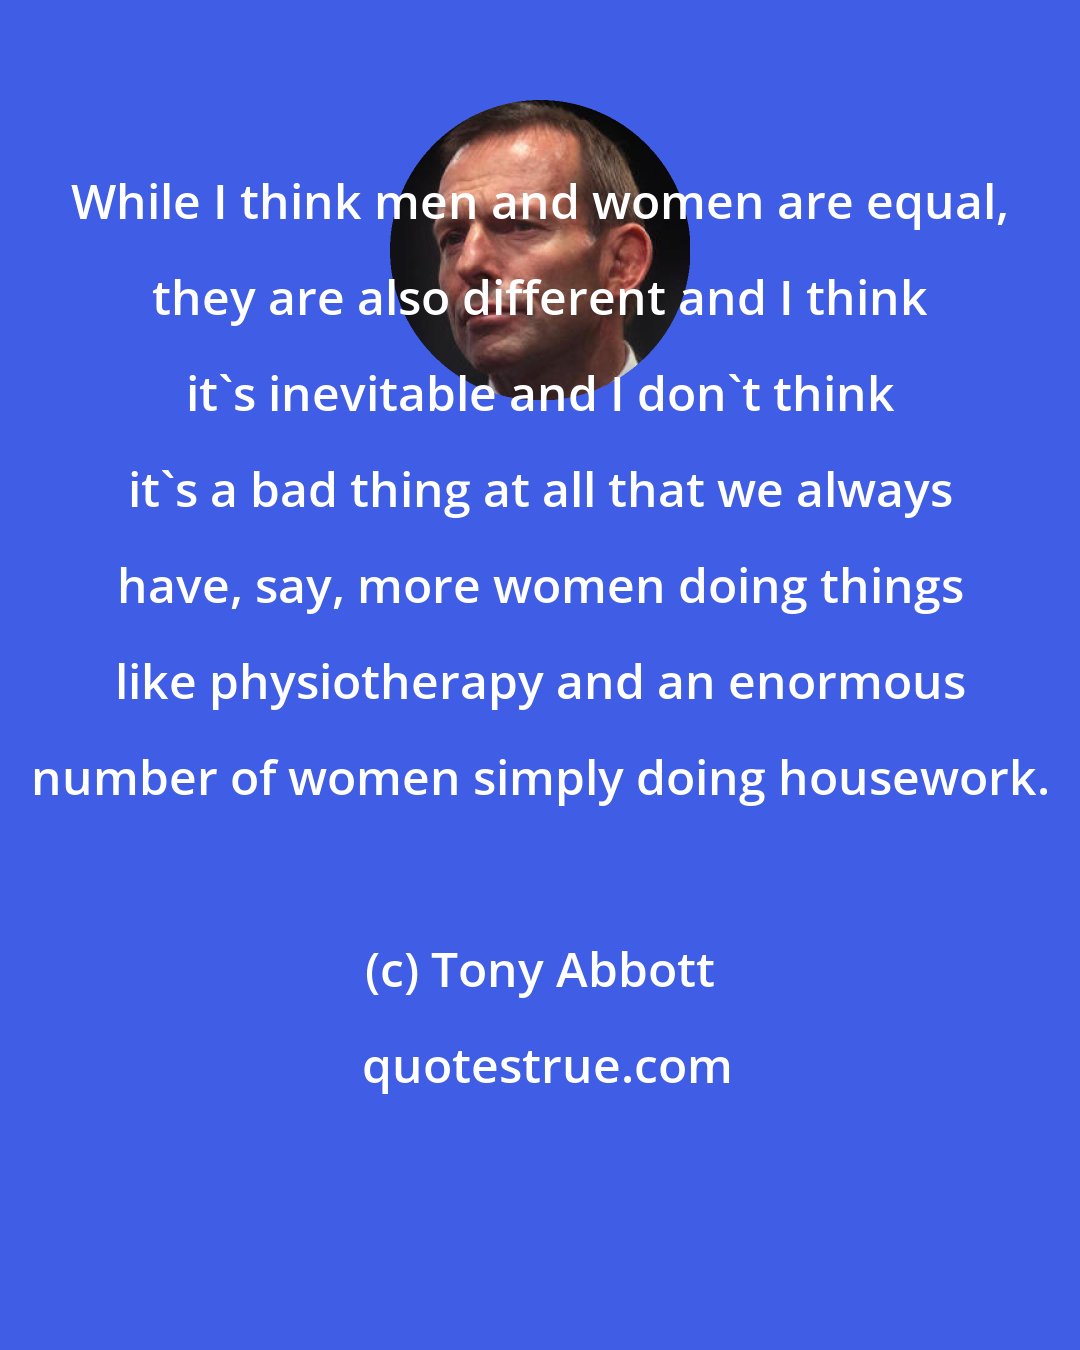 Tony Abbott: While I think men and women are equal, they are also different and I think it's inevitable and I don't think it's a bad thing at all that we always have, say, more women doing things like physiotherapy and an enormous number of women simply doing housework.